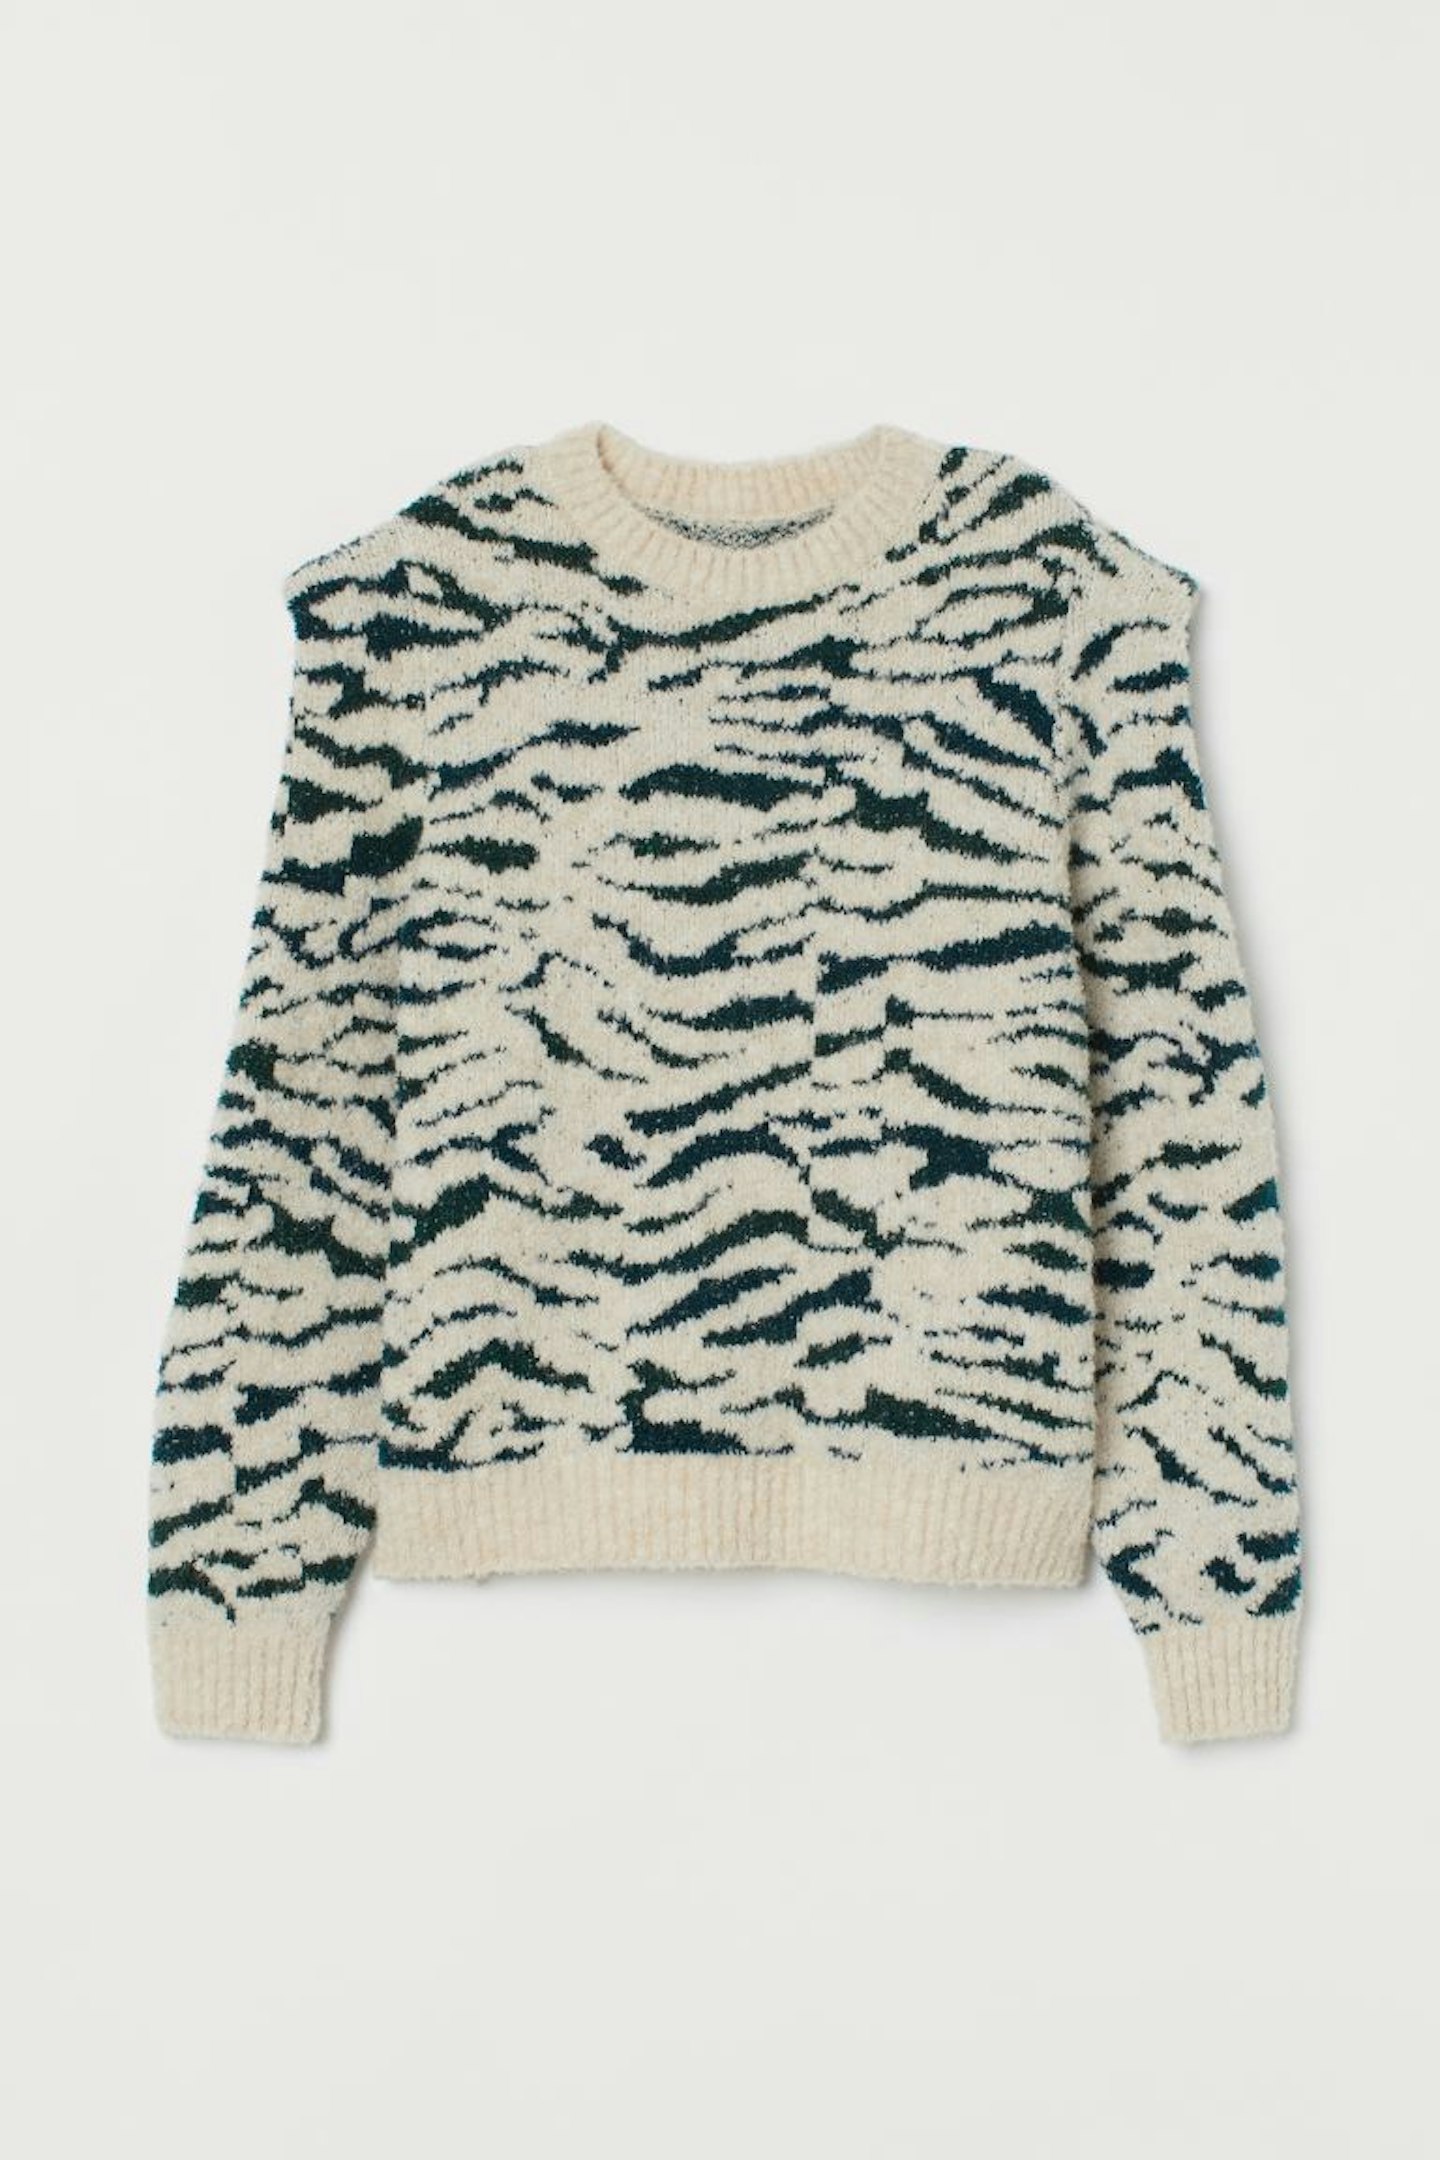 H&M, Knitted Jumper, WAS £34.99 NOW £23